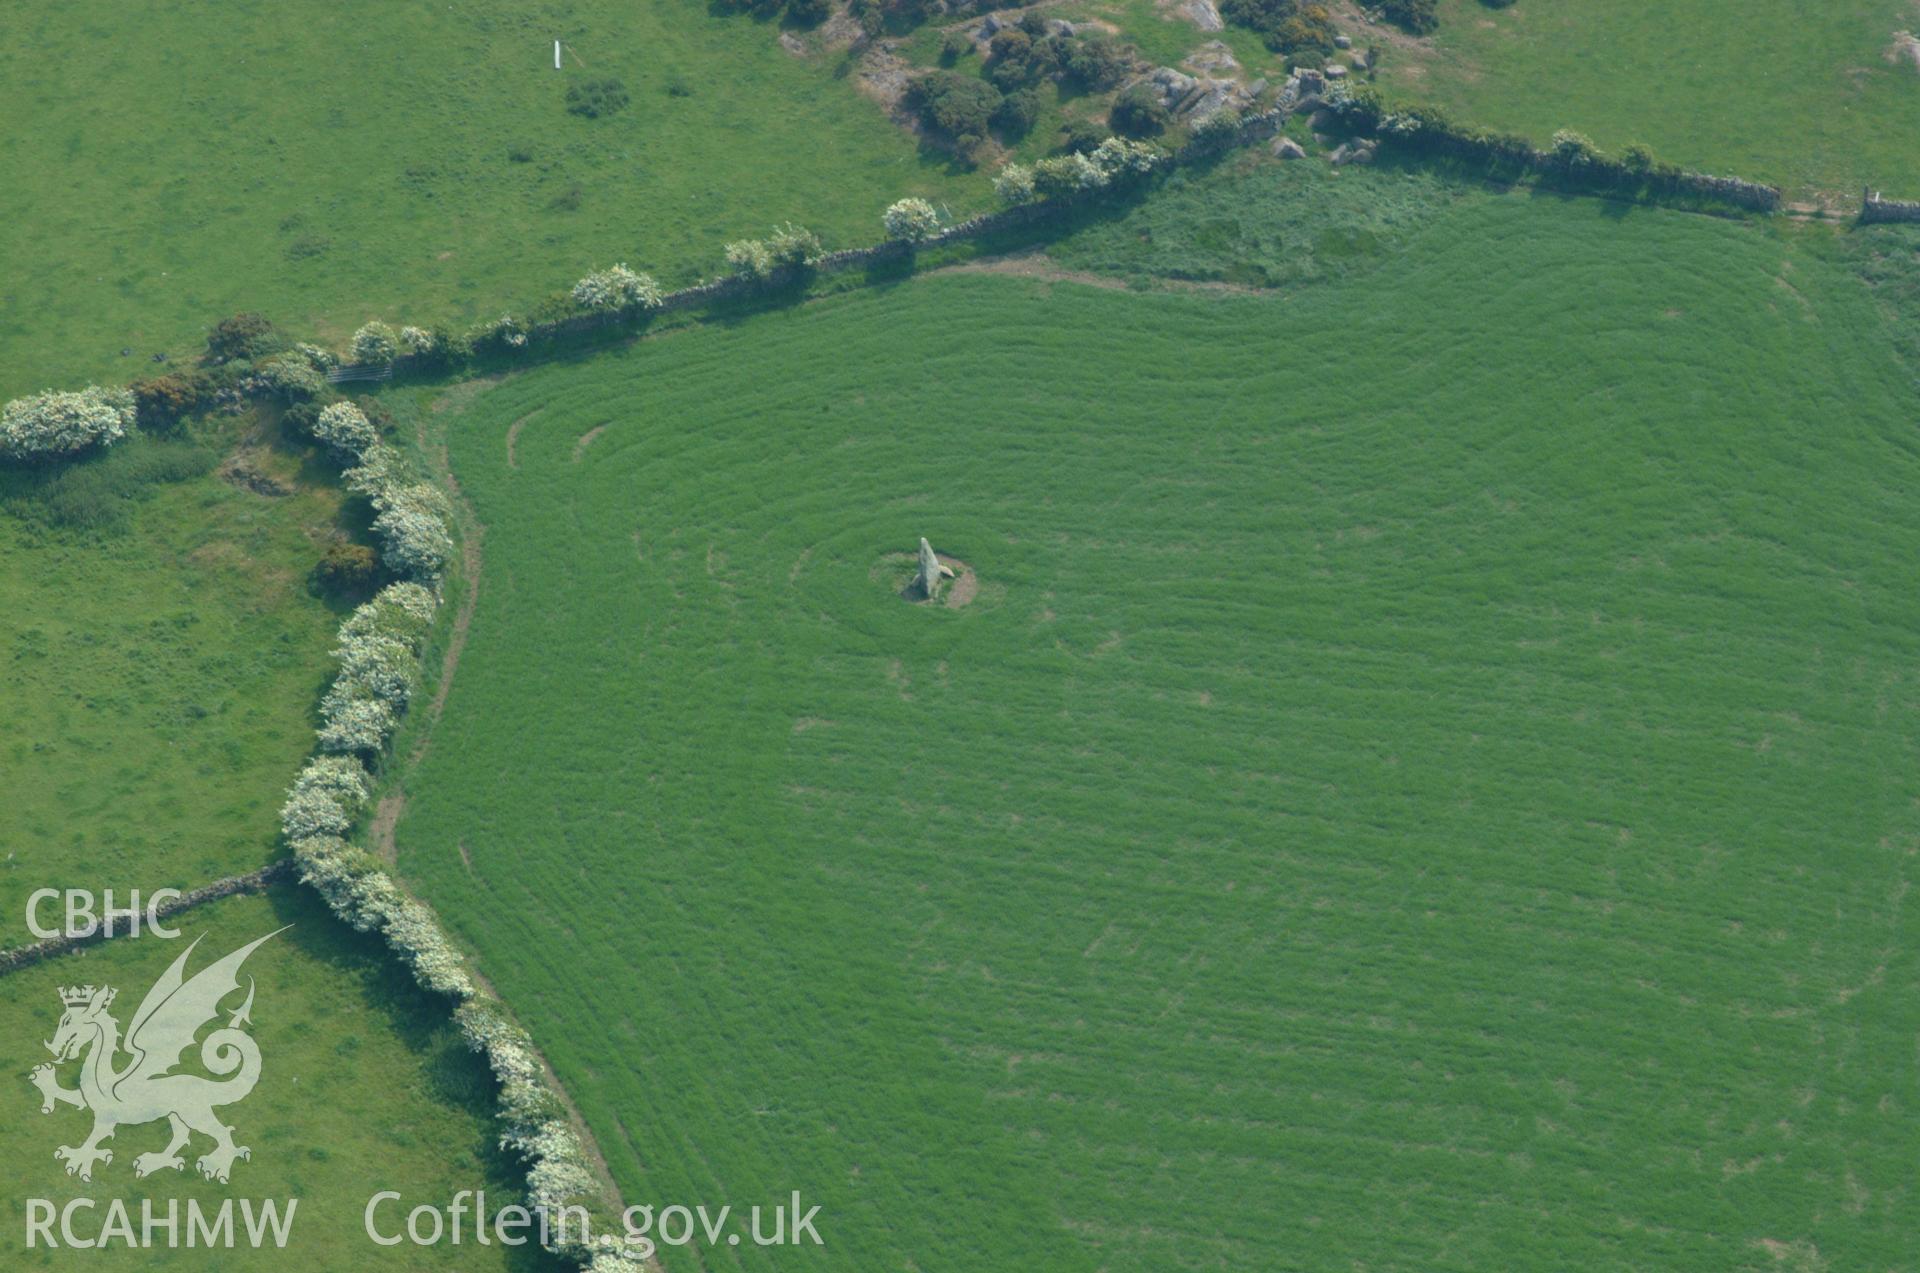 RCAHMW colour oblique aerial photograph of Bod Deiniol Standing Stone taken on 26/05/2004 by Toby Driver